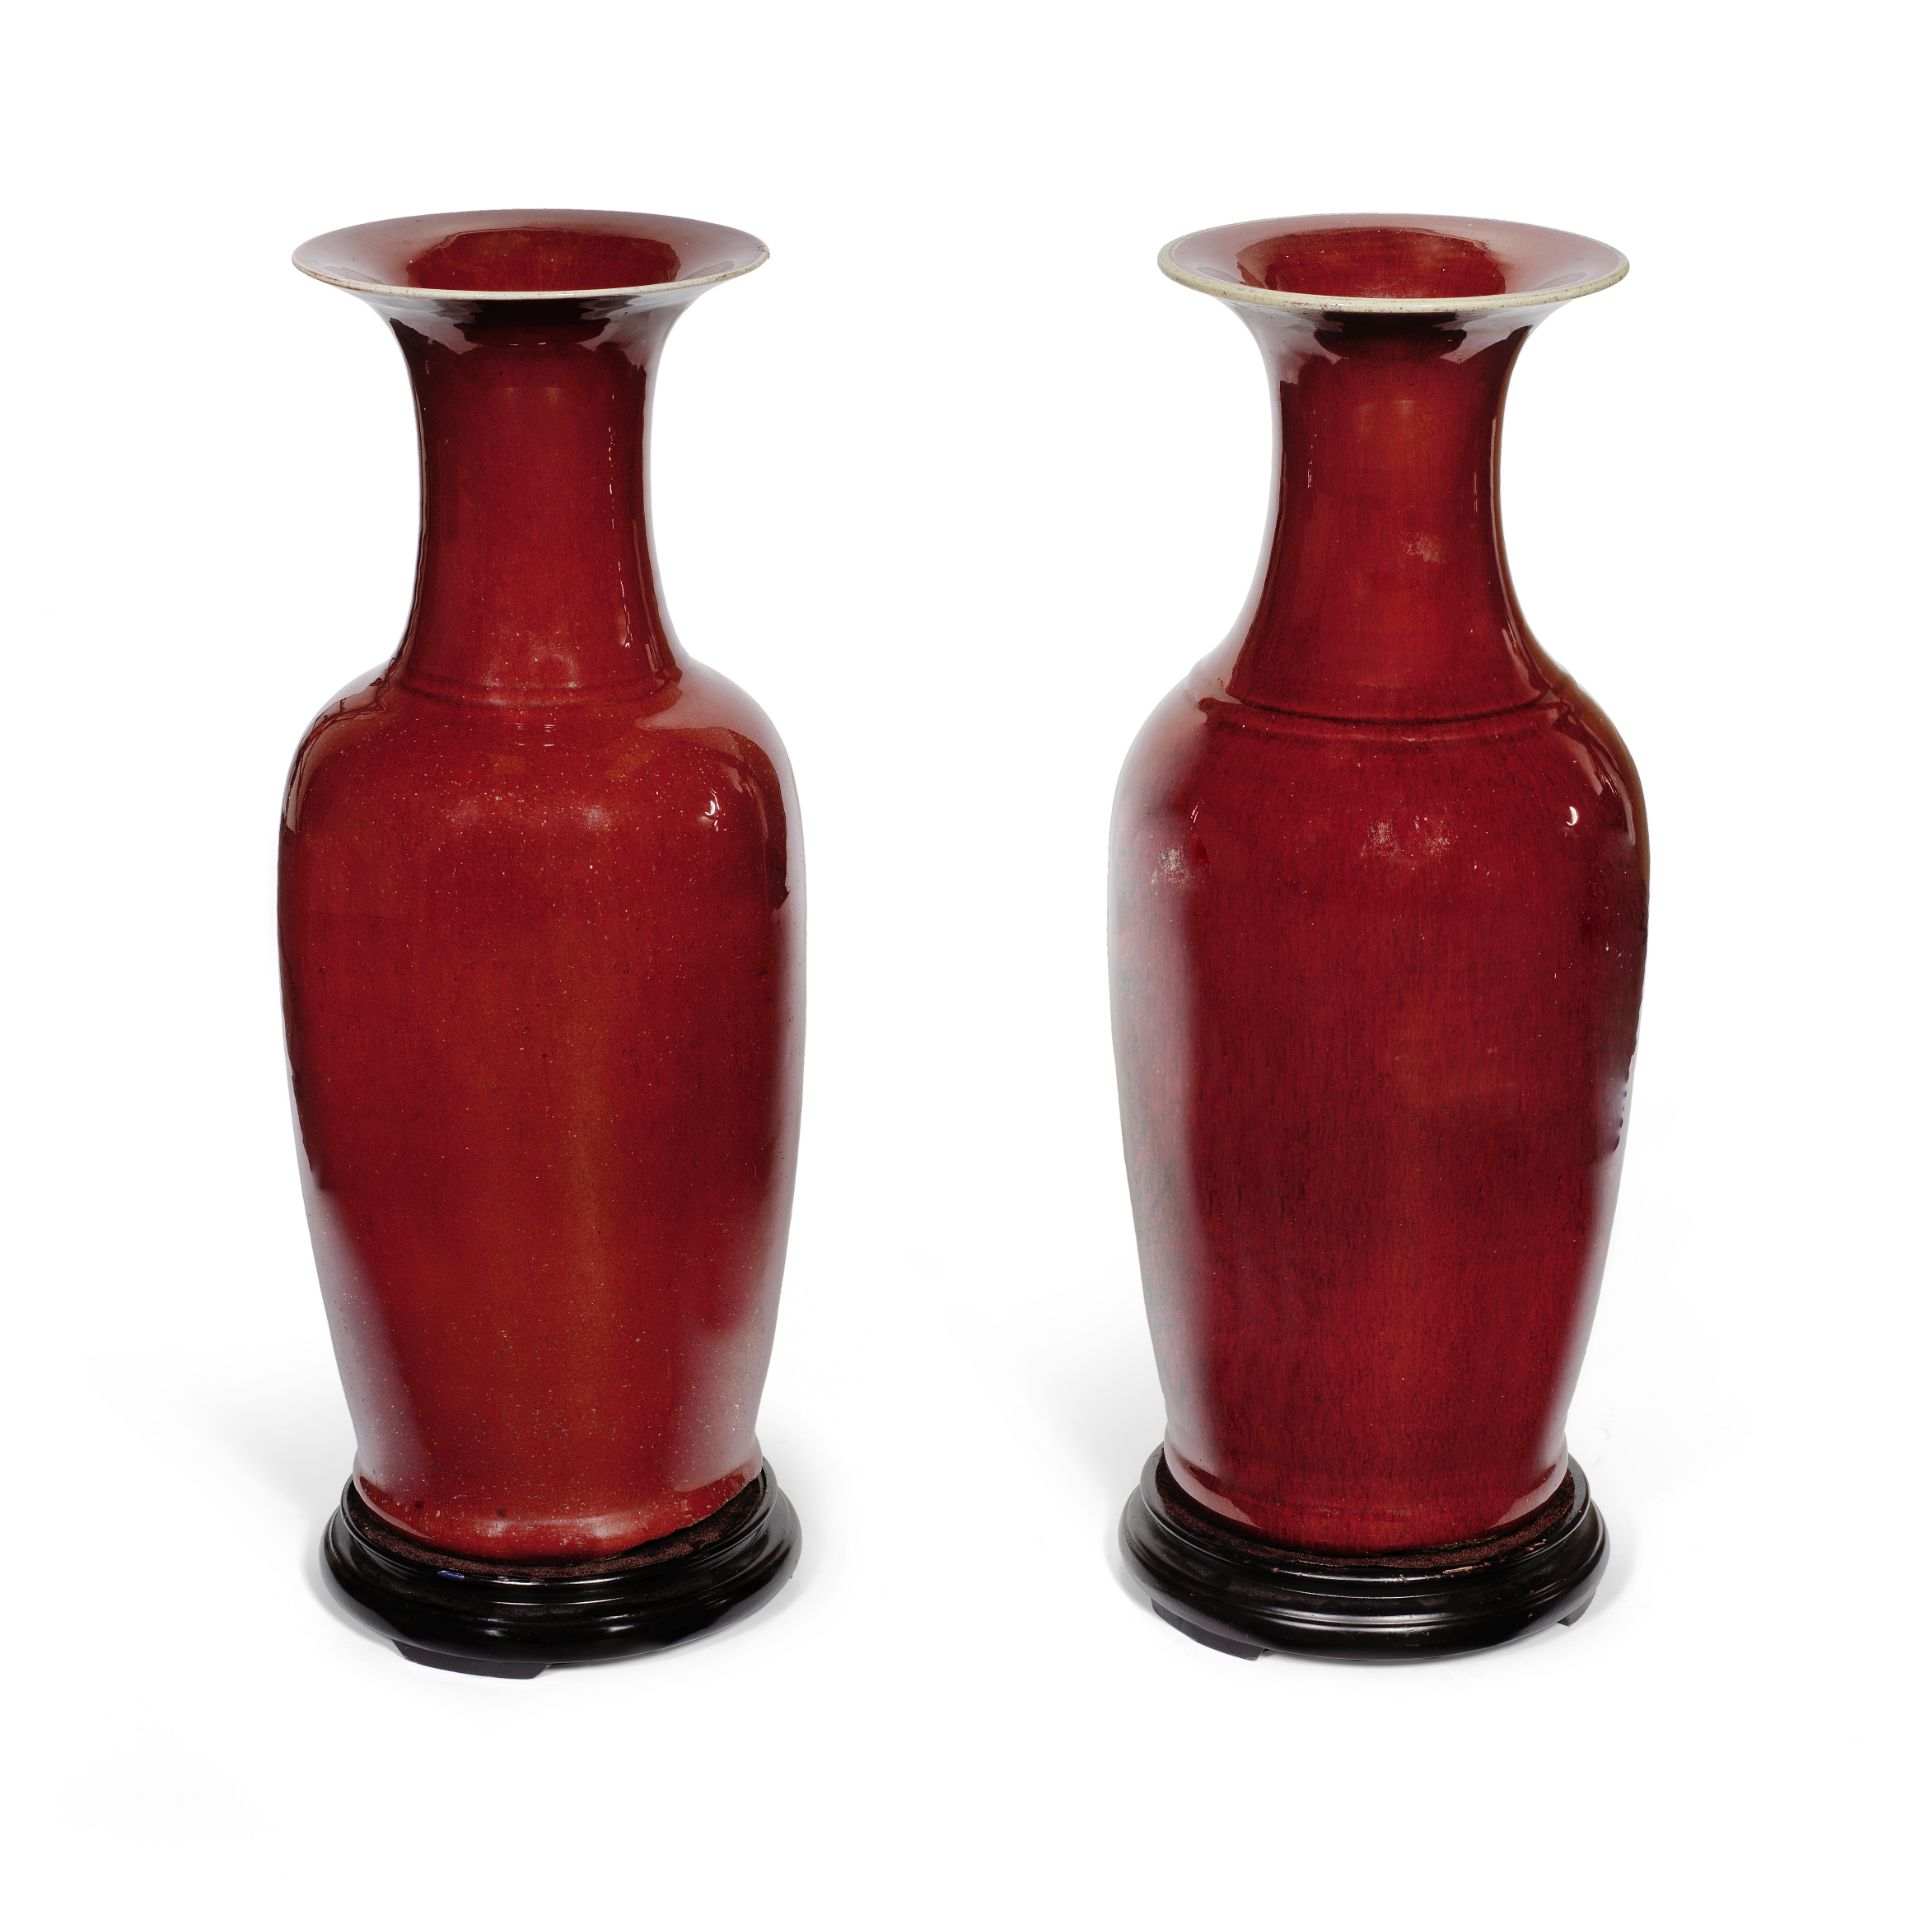 A LARGE PAIR OF SANG-DE-BOEUF GLAZED BALUSTER VASES Late Qing Dynasty (4)